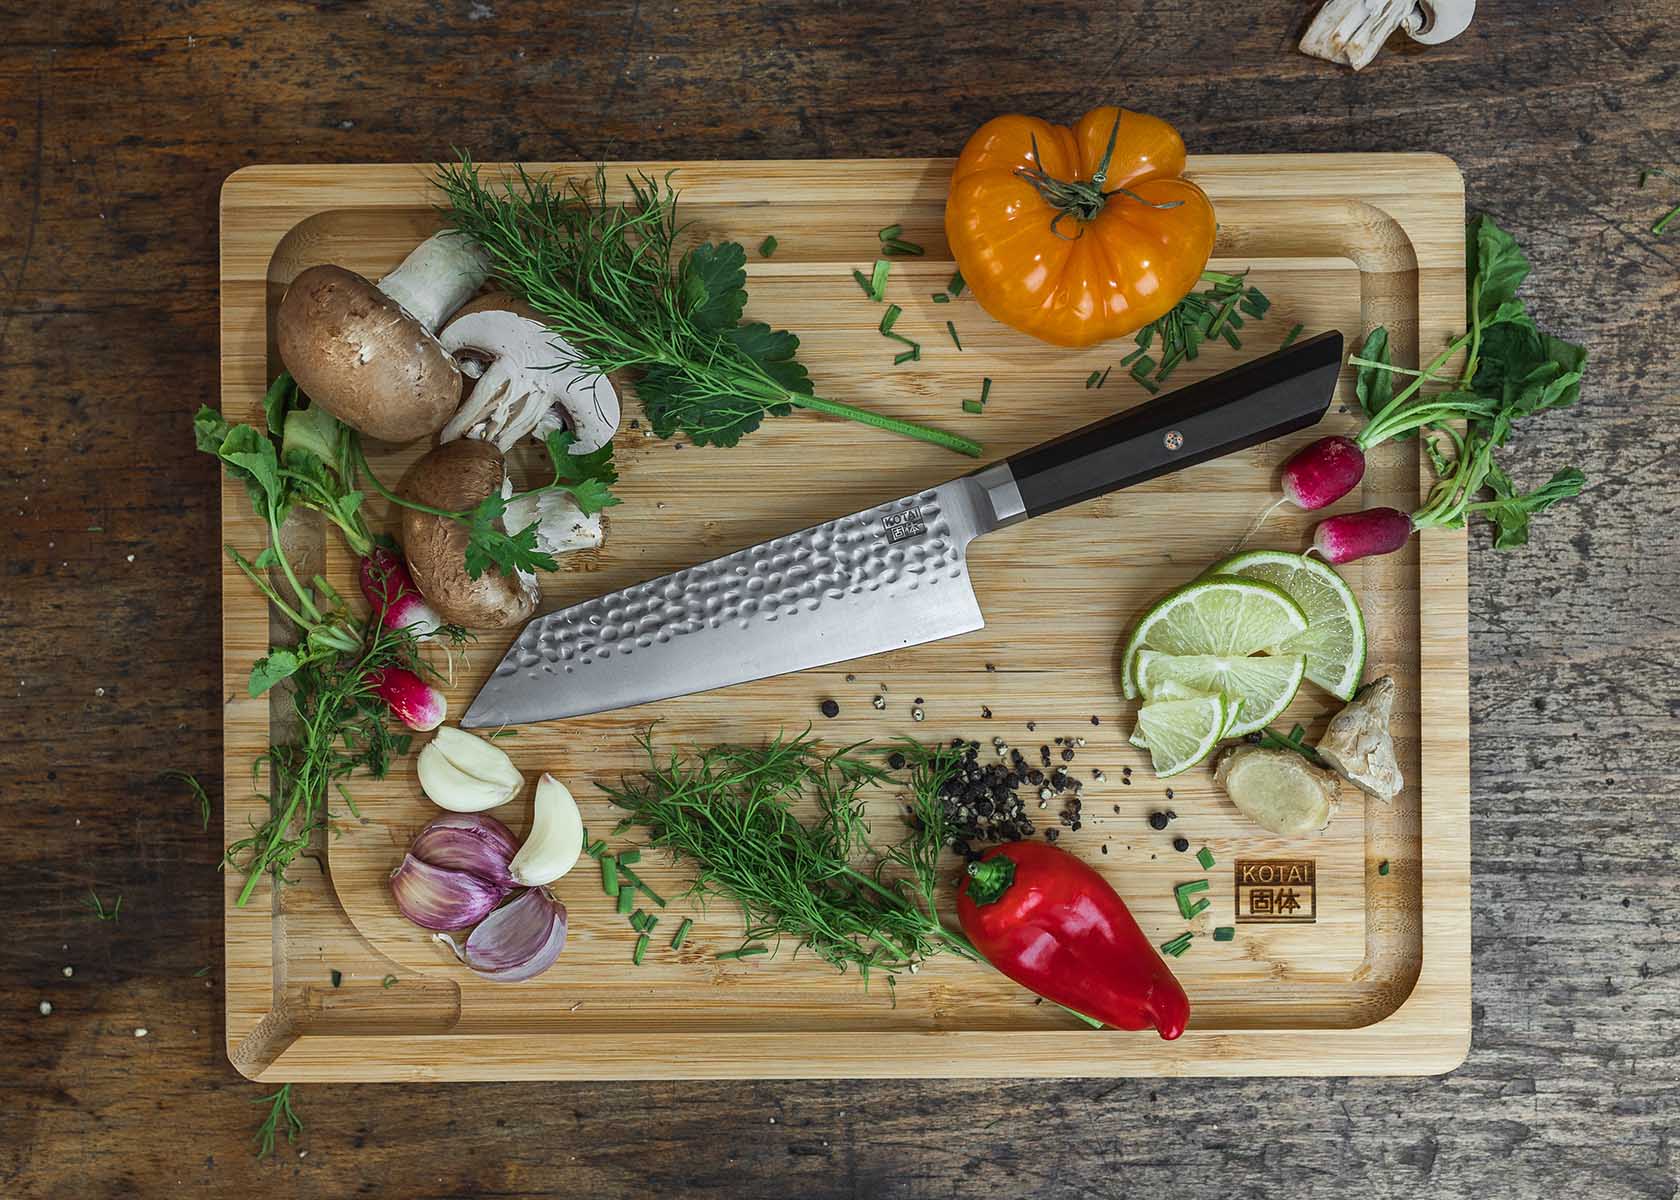 santoku knife and essential kitchen ingredients on a bamboo cutting board